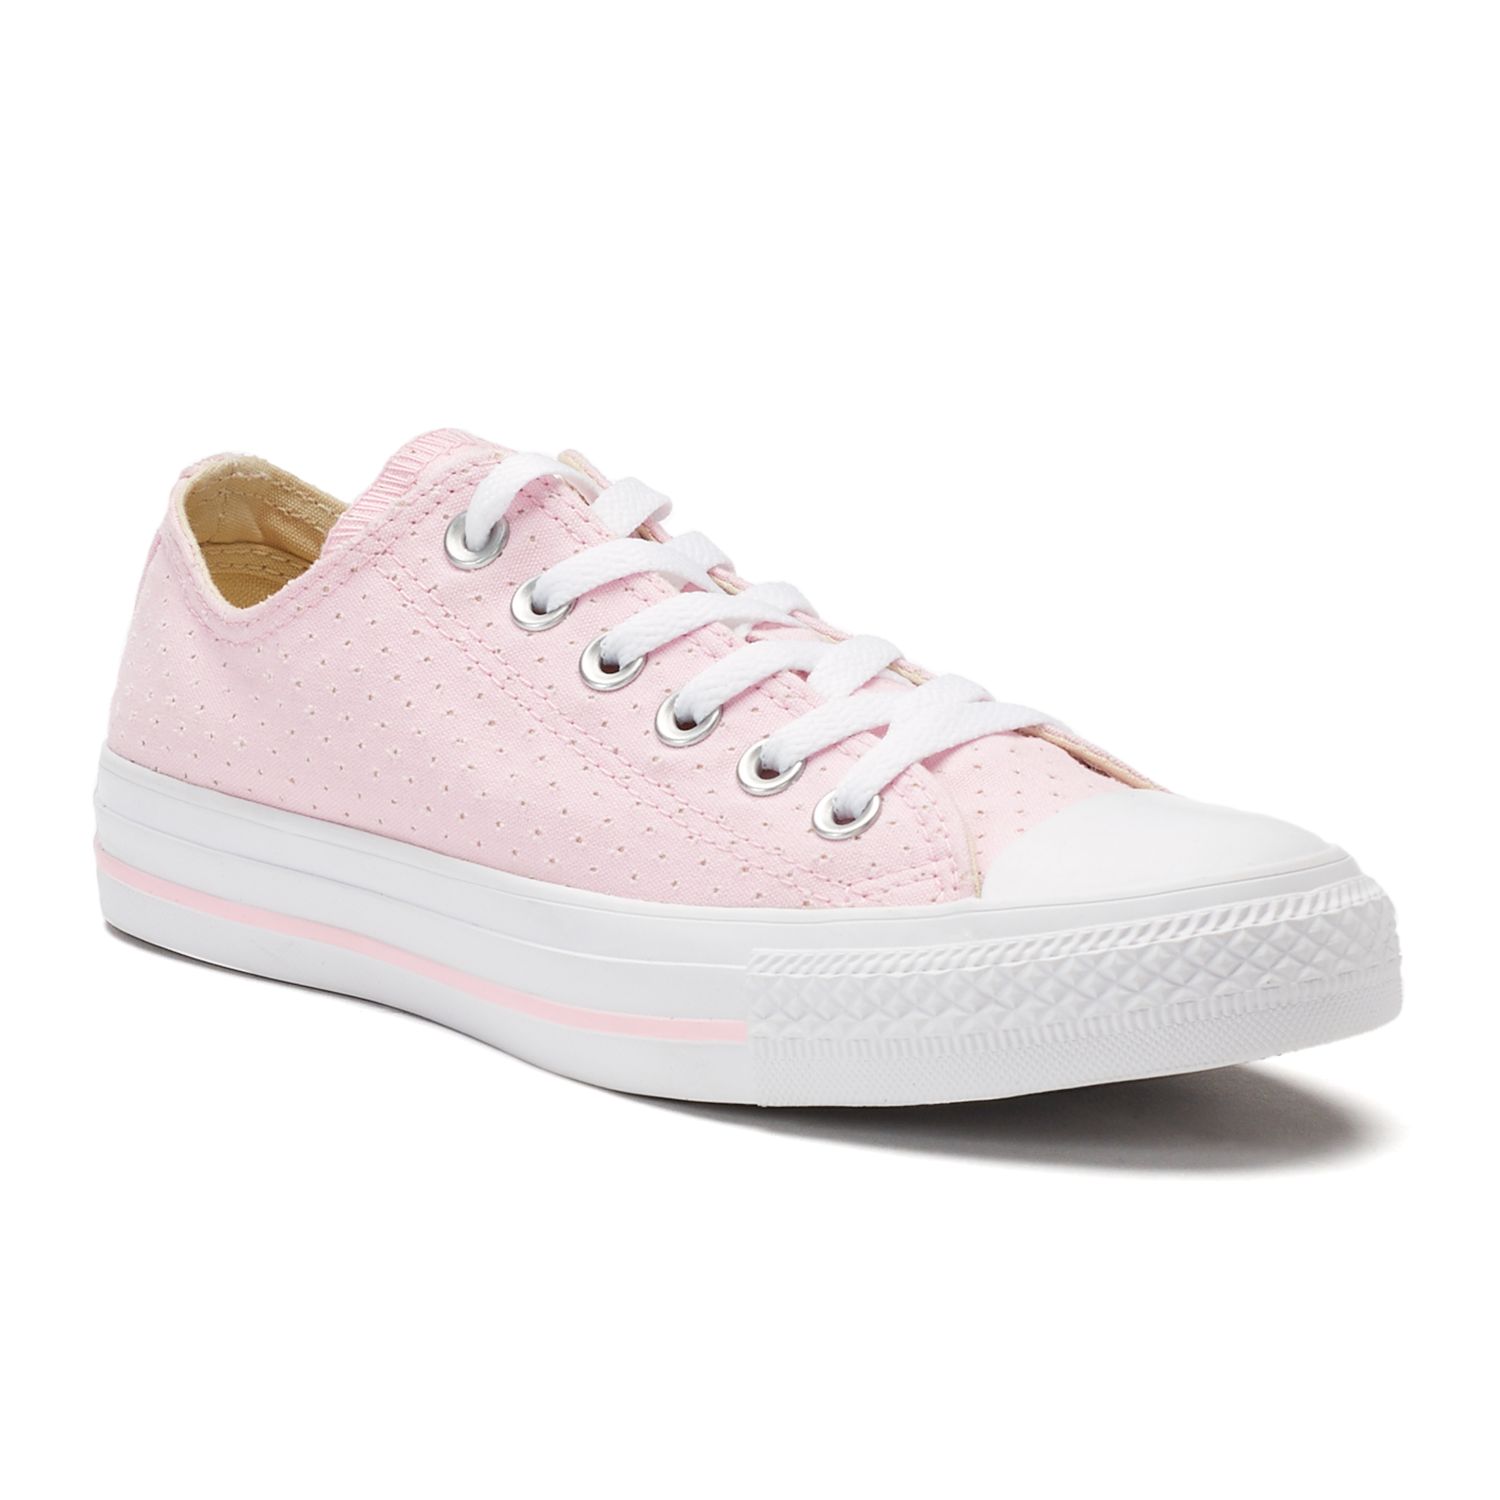 Star Ox Sneakers, Size: 10, Light Pink 